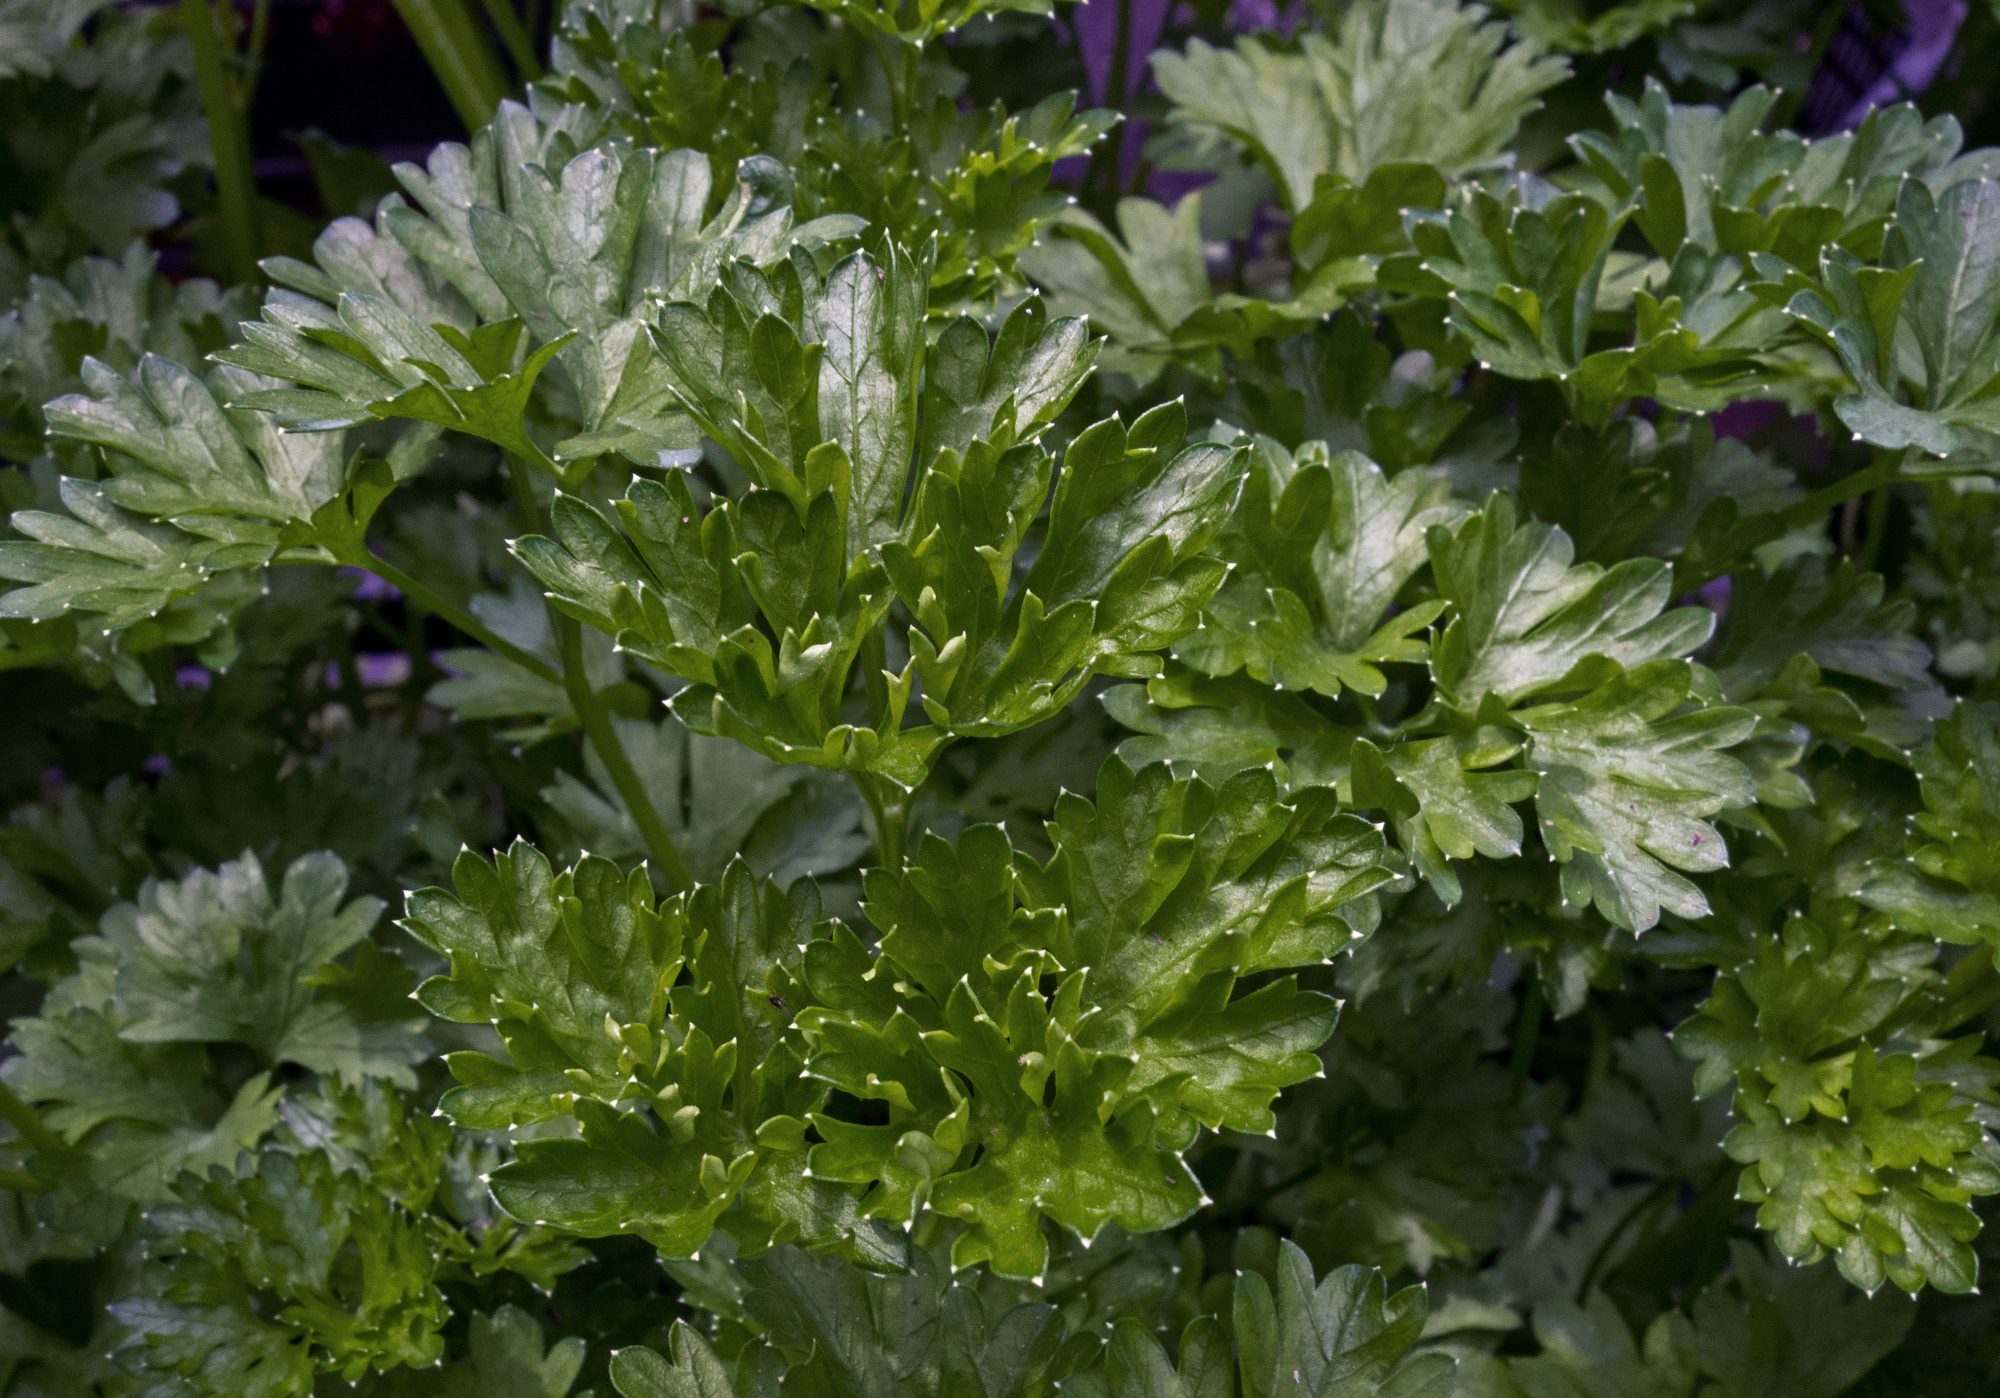 Some delicious flat-leaf Italian parsley to look at.